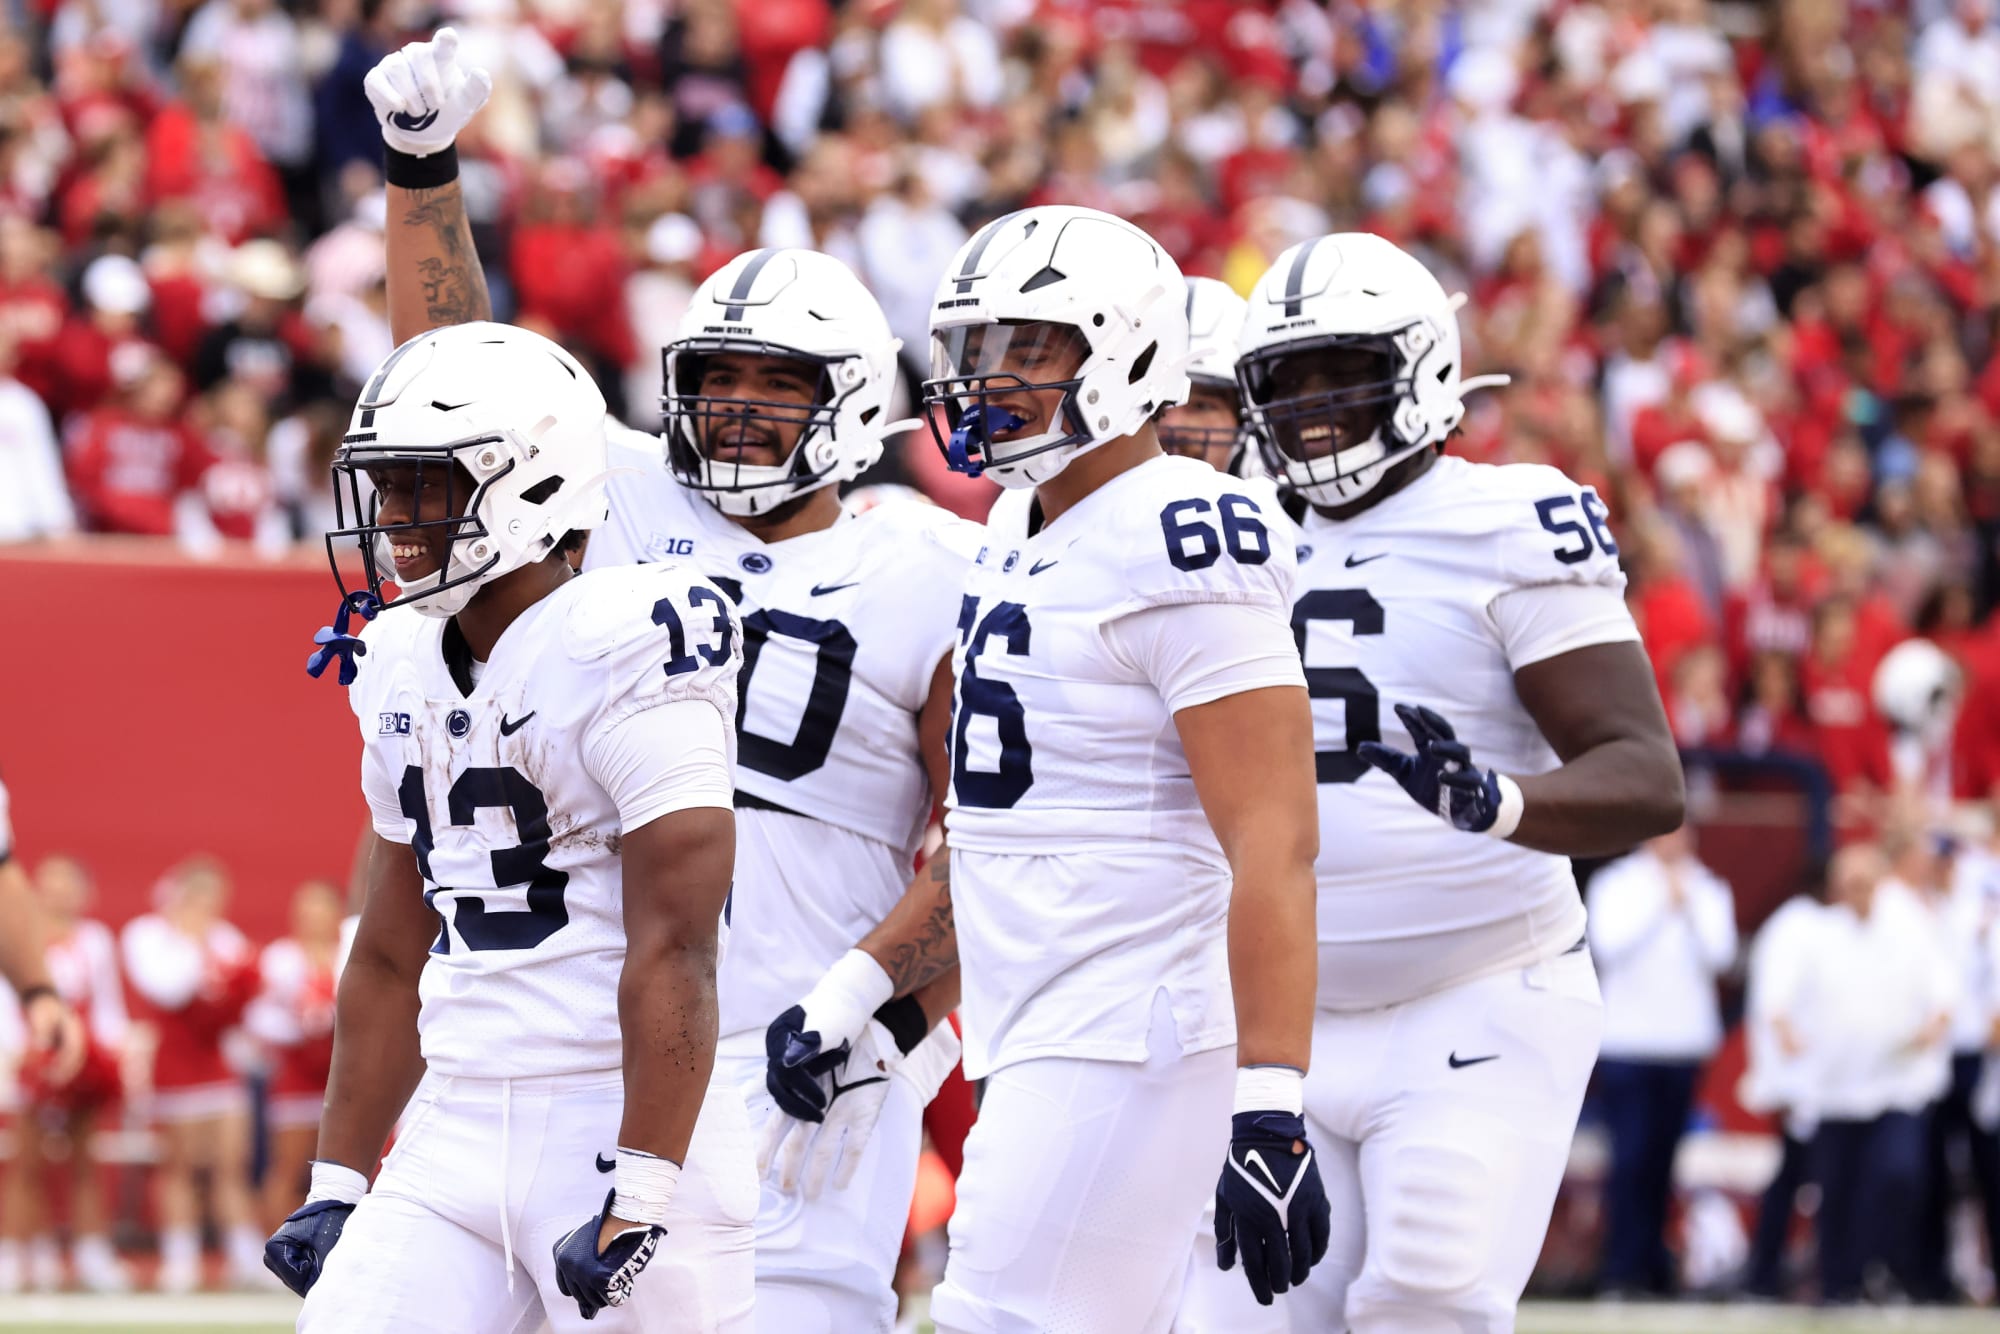 Penn State Football positioned to repeat offensive line recruiting